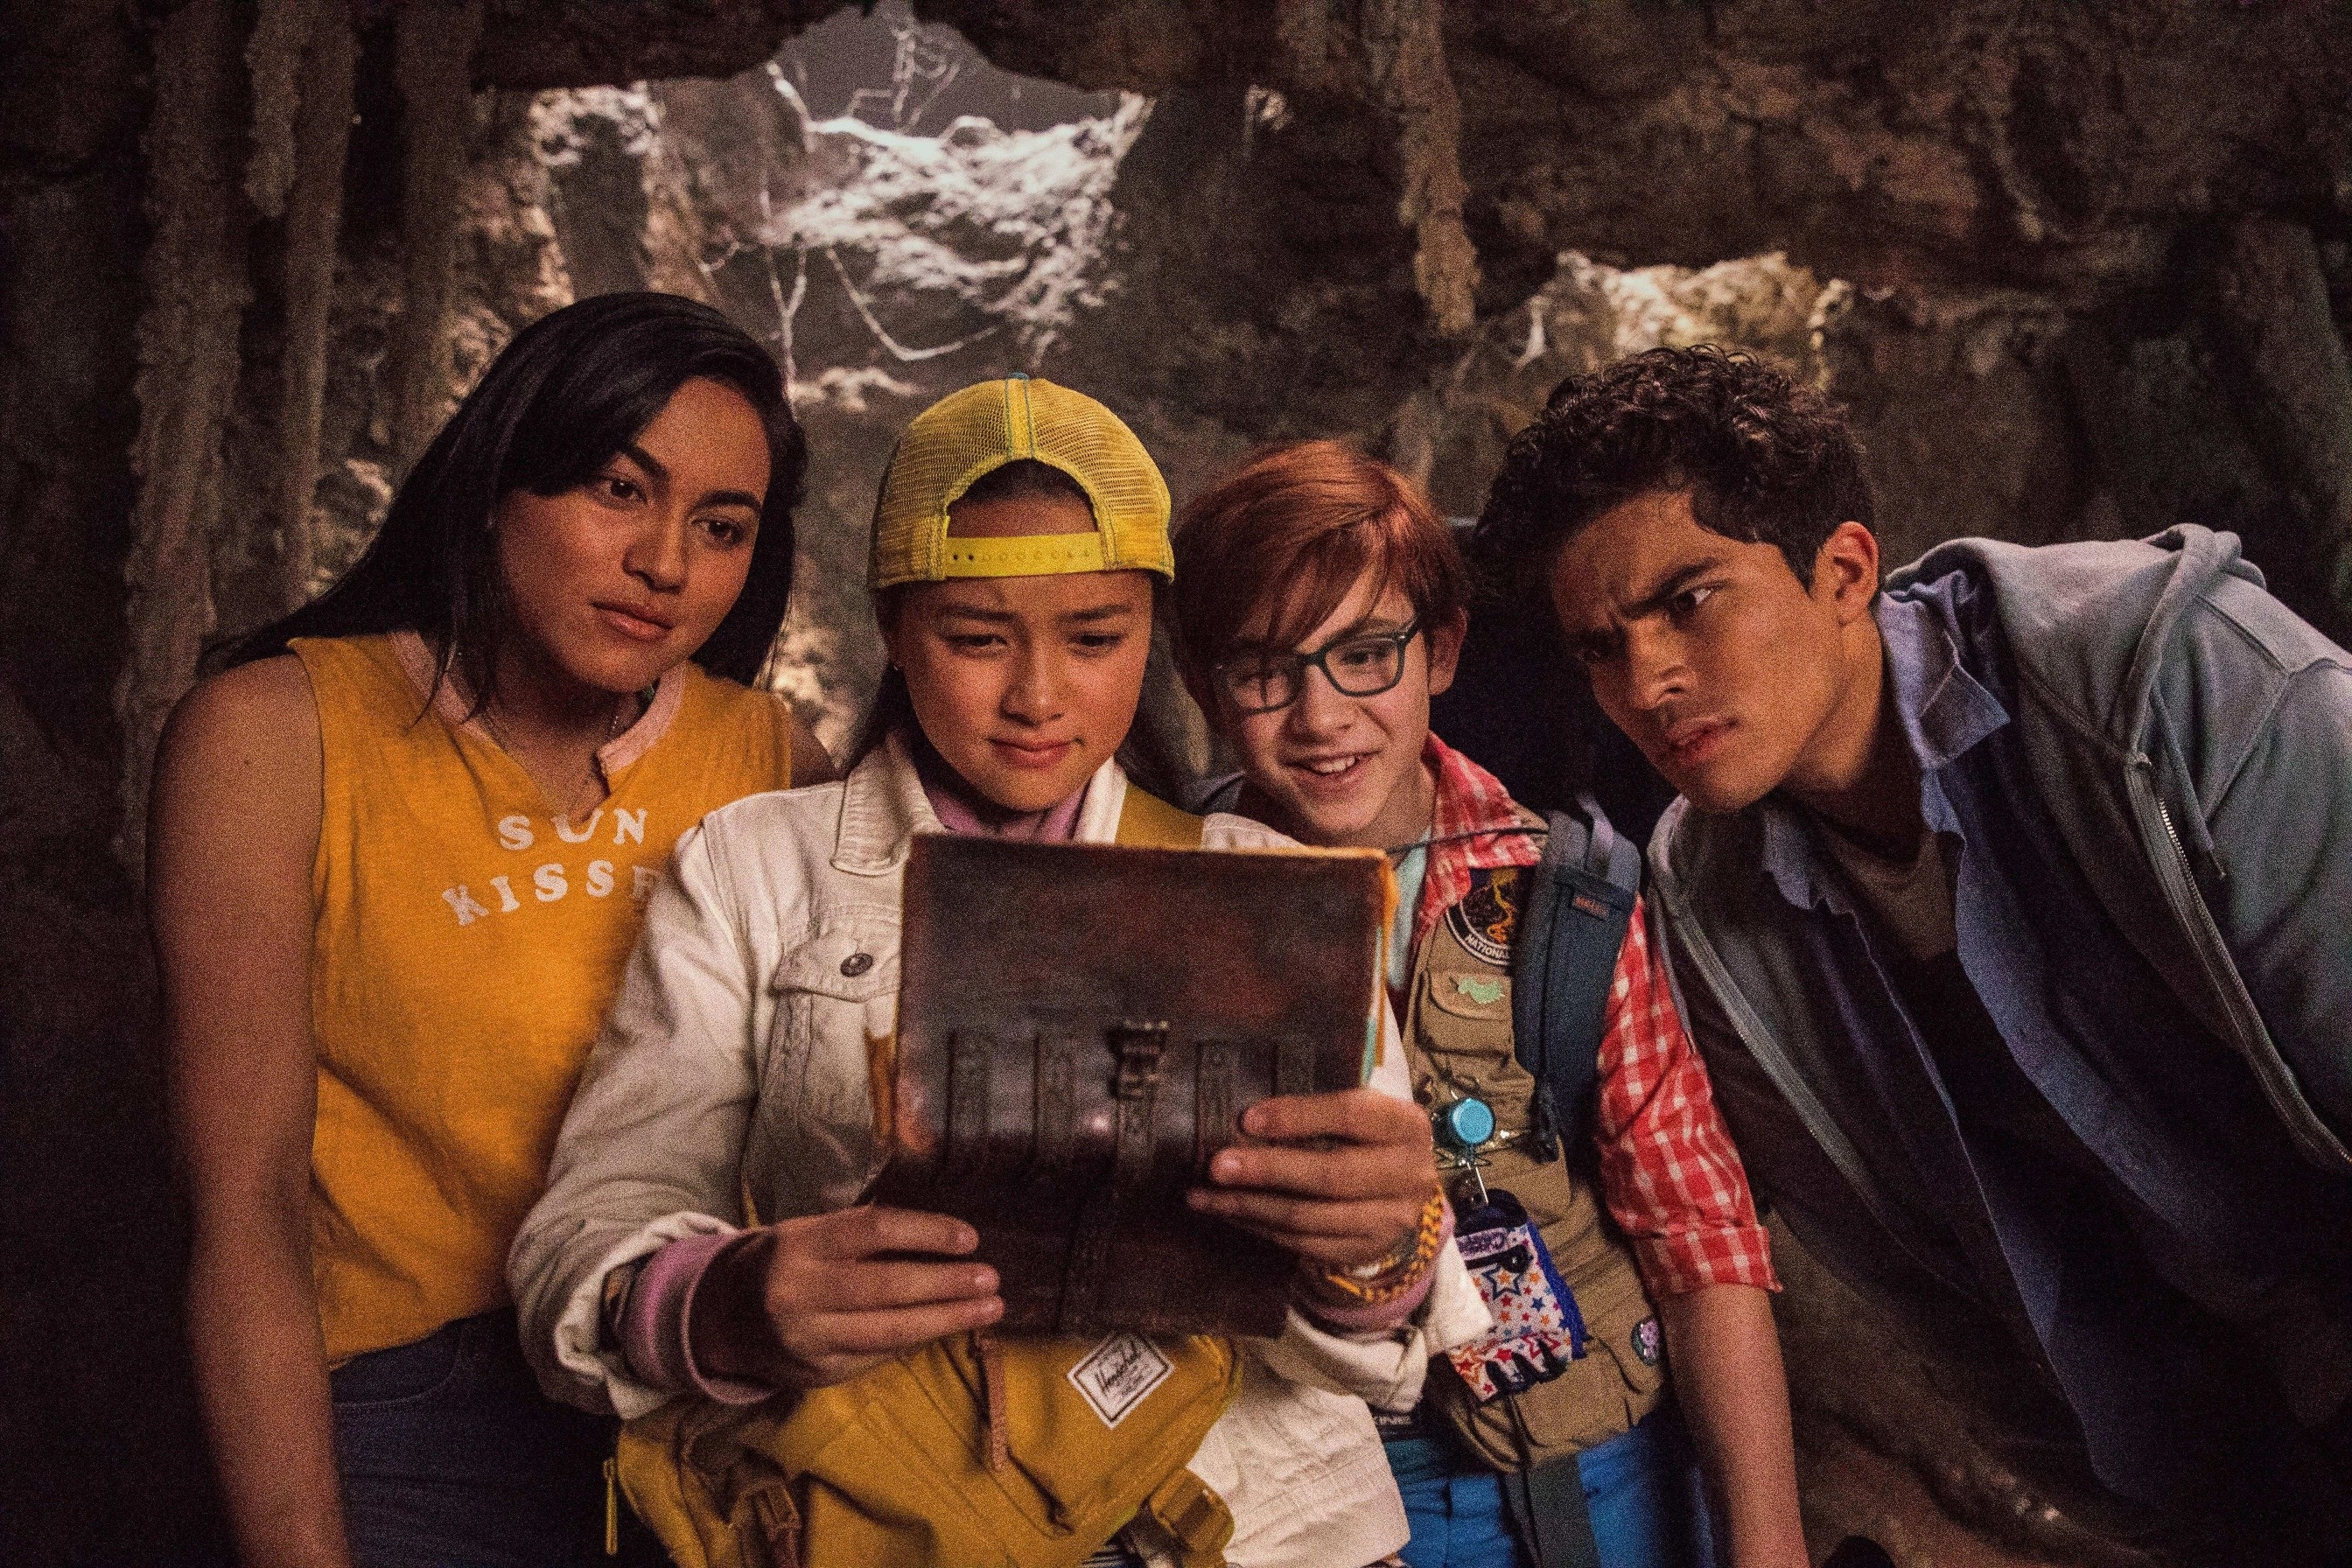 Four young people stare at an old book in a cave